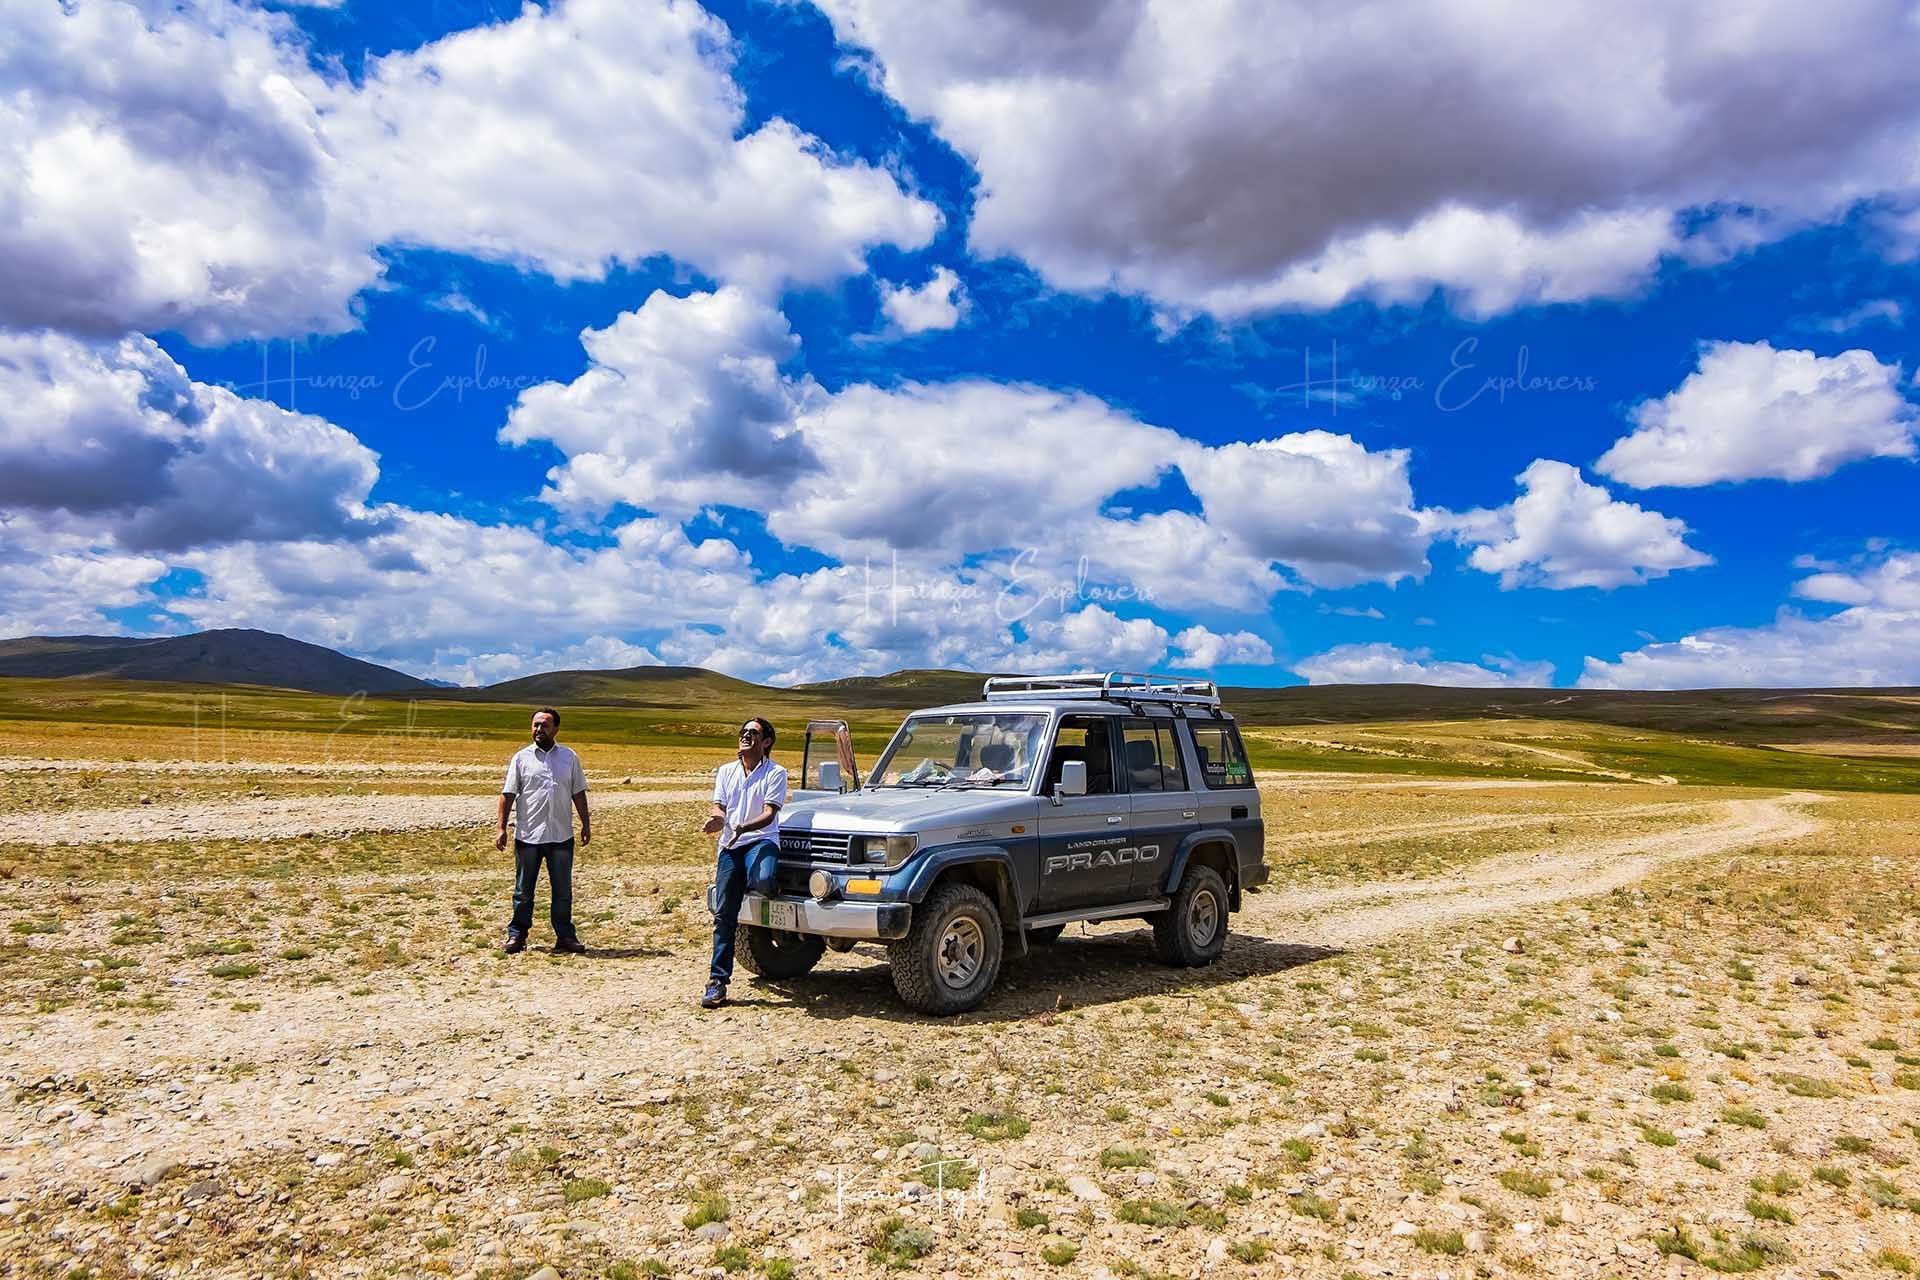 Day 21: Deosai to Rama - Scenic Tranquility